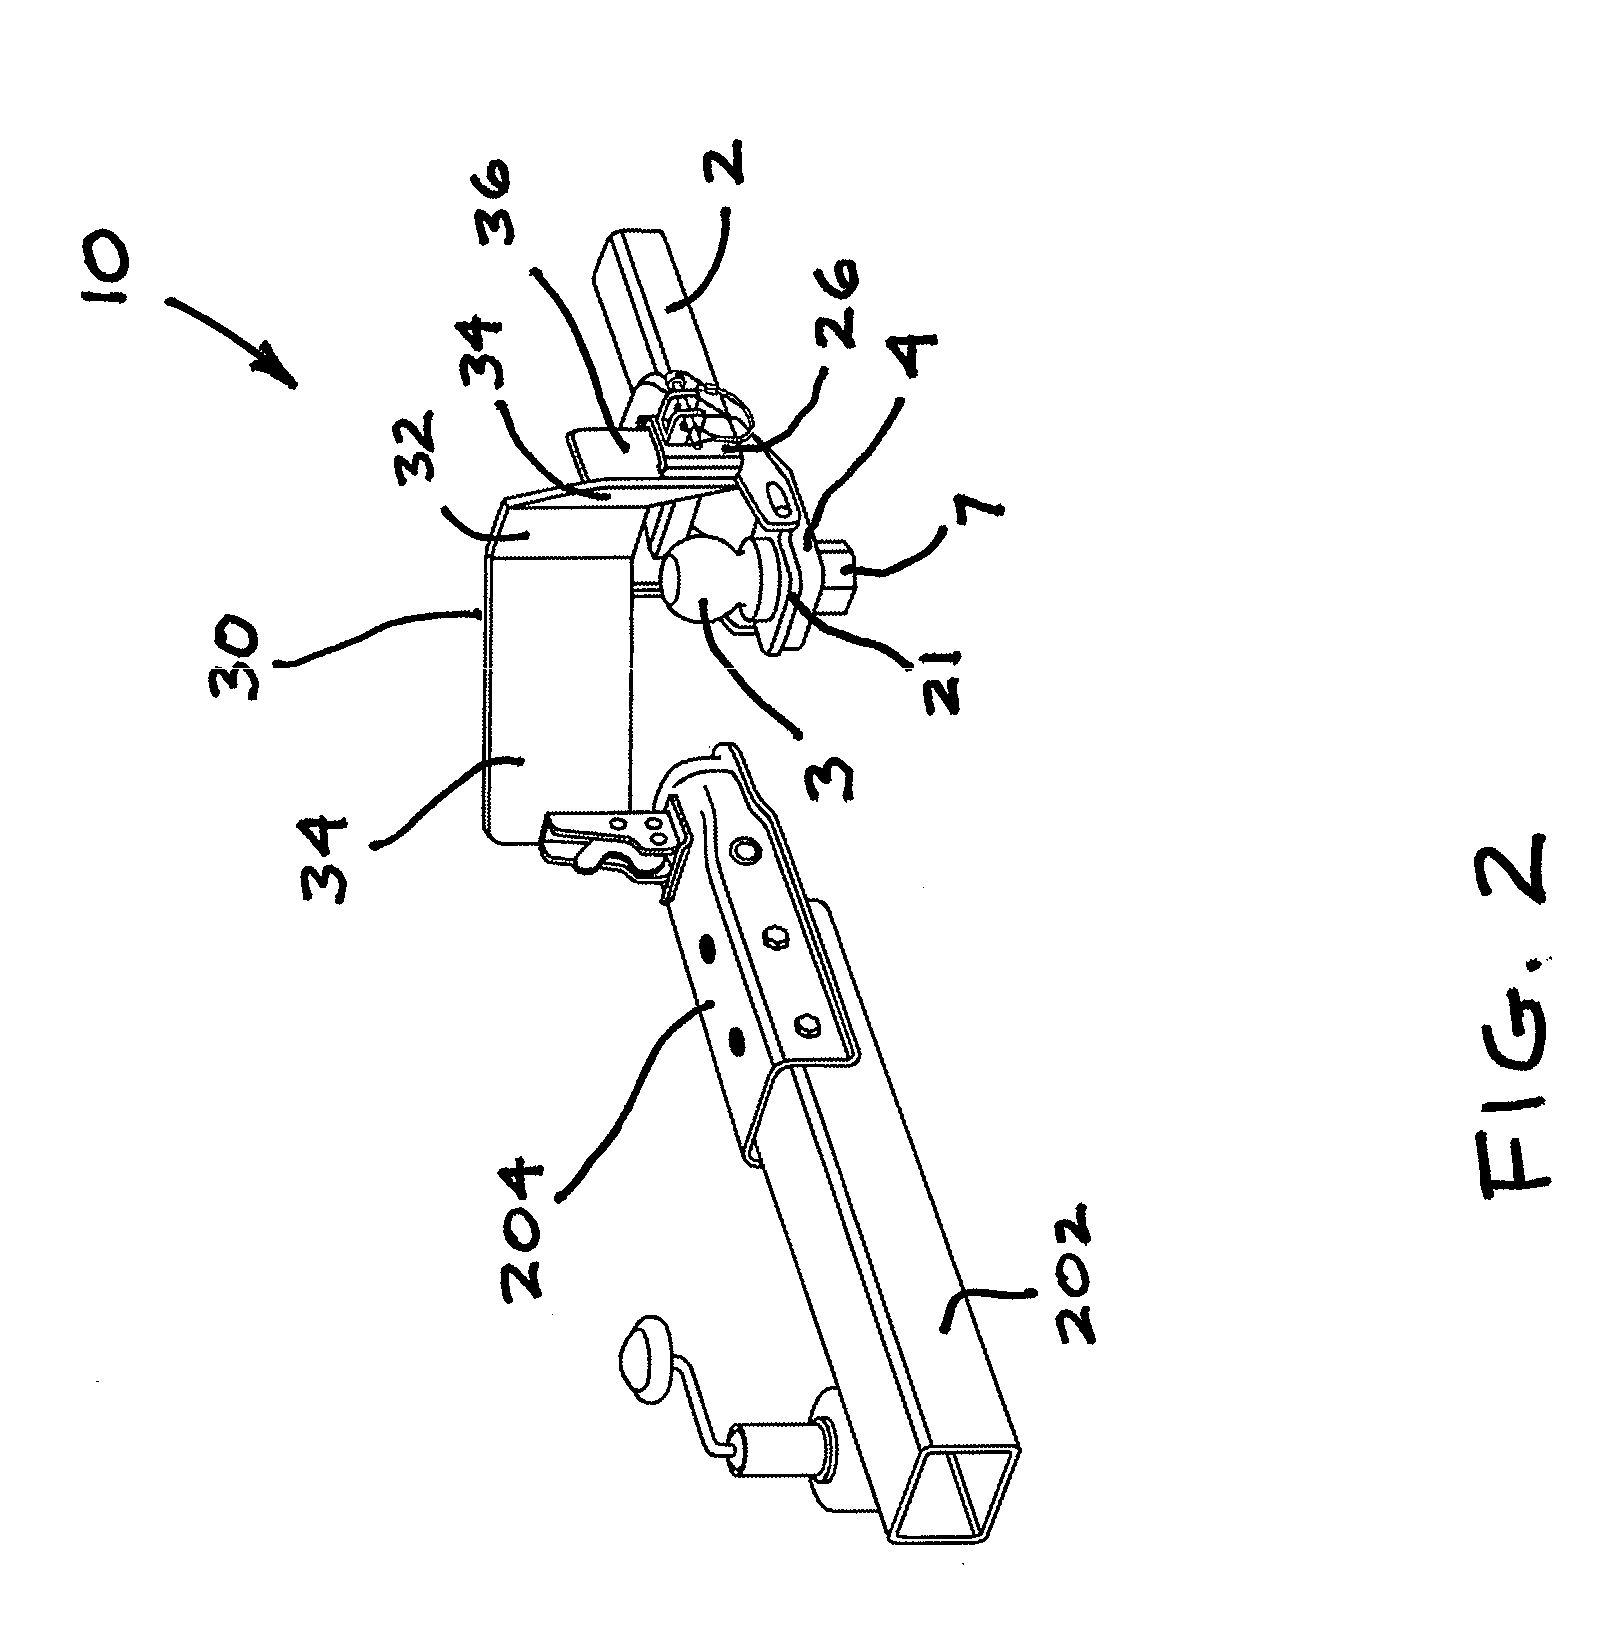 Combined trailer hitch coupler guide and securement assembly and method